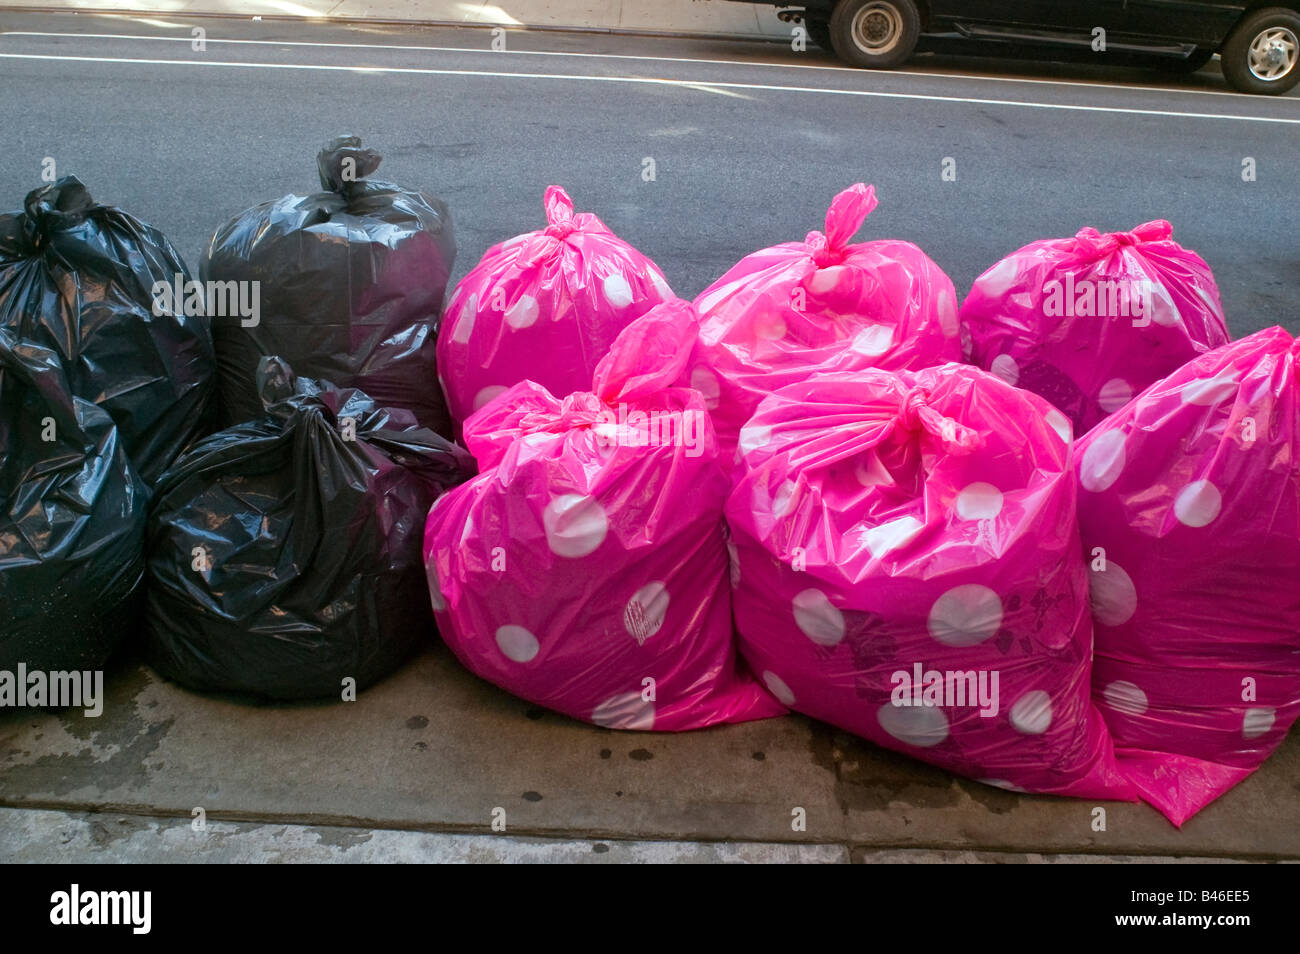 14 Small Pink Trash Bags Images, Stock Photos, 3D objects, & Vectors